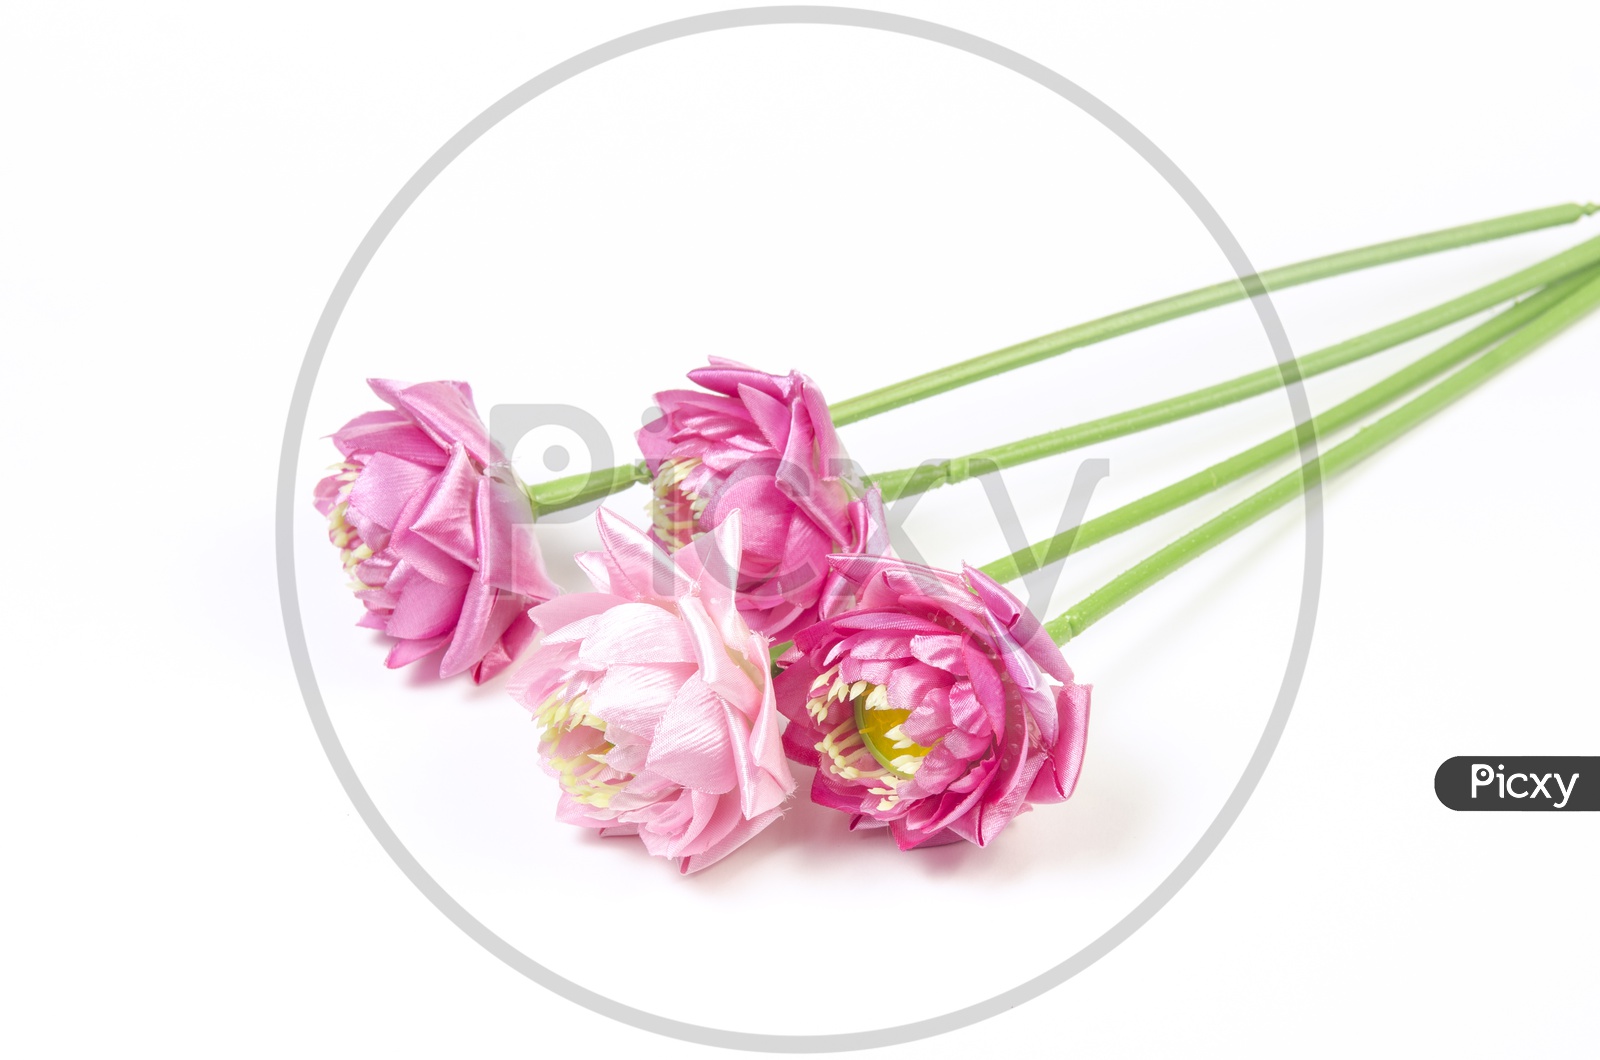 Pink Lotus Flowers Bunch On an Isolated White Background